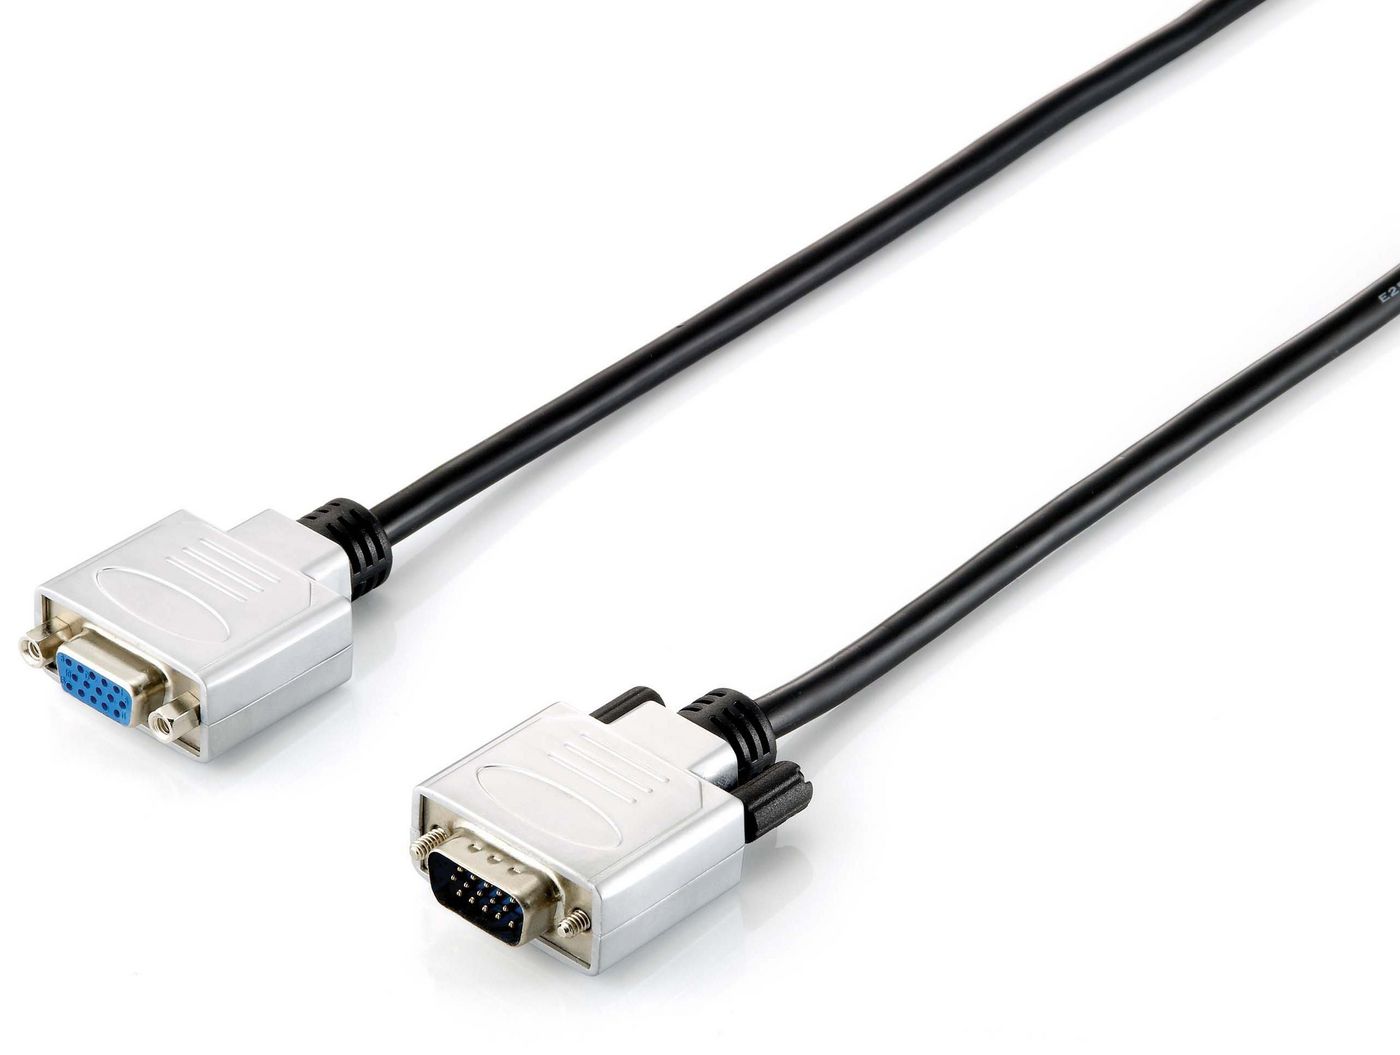 Equip 118850 W128290069 Hd15 Vga Extension Cable, 1.8M 